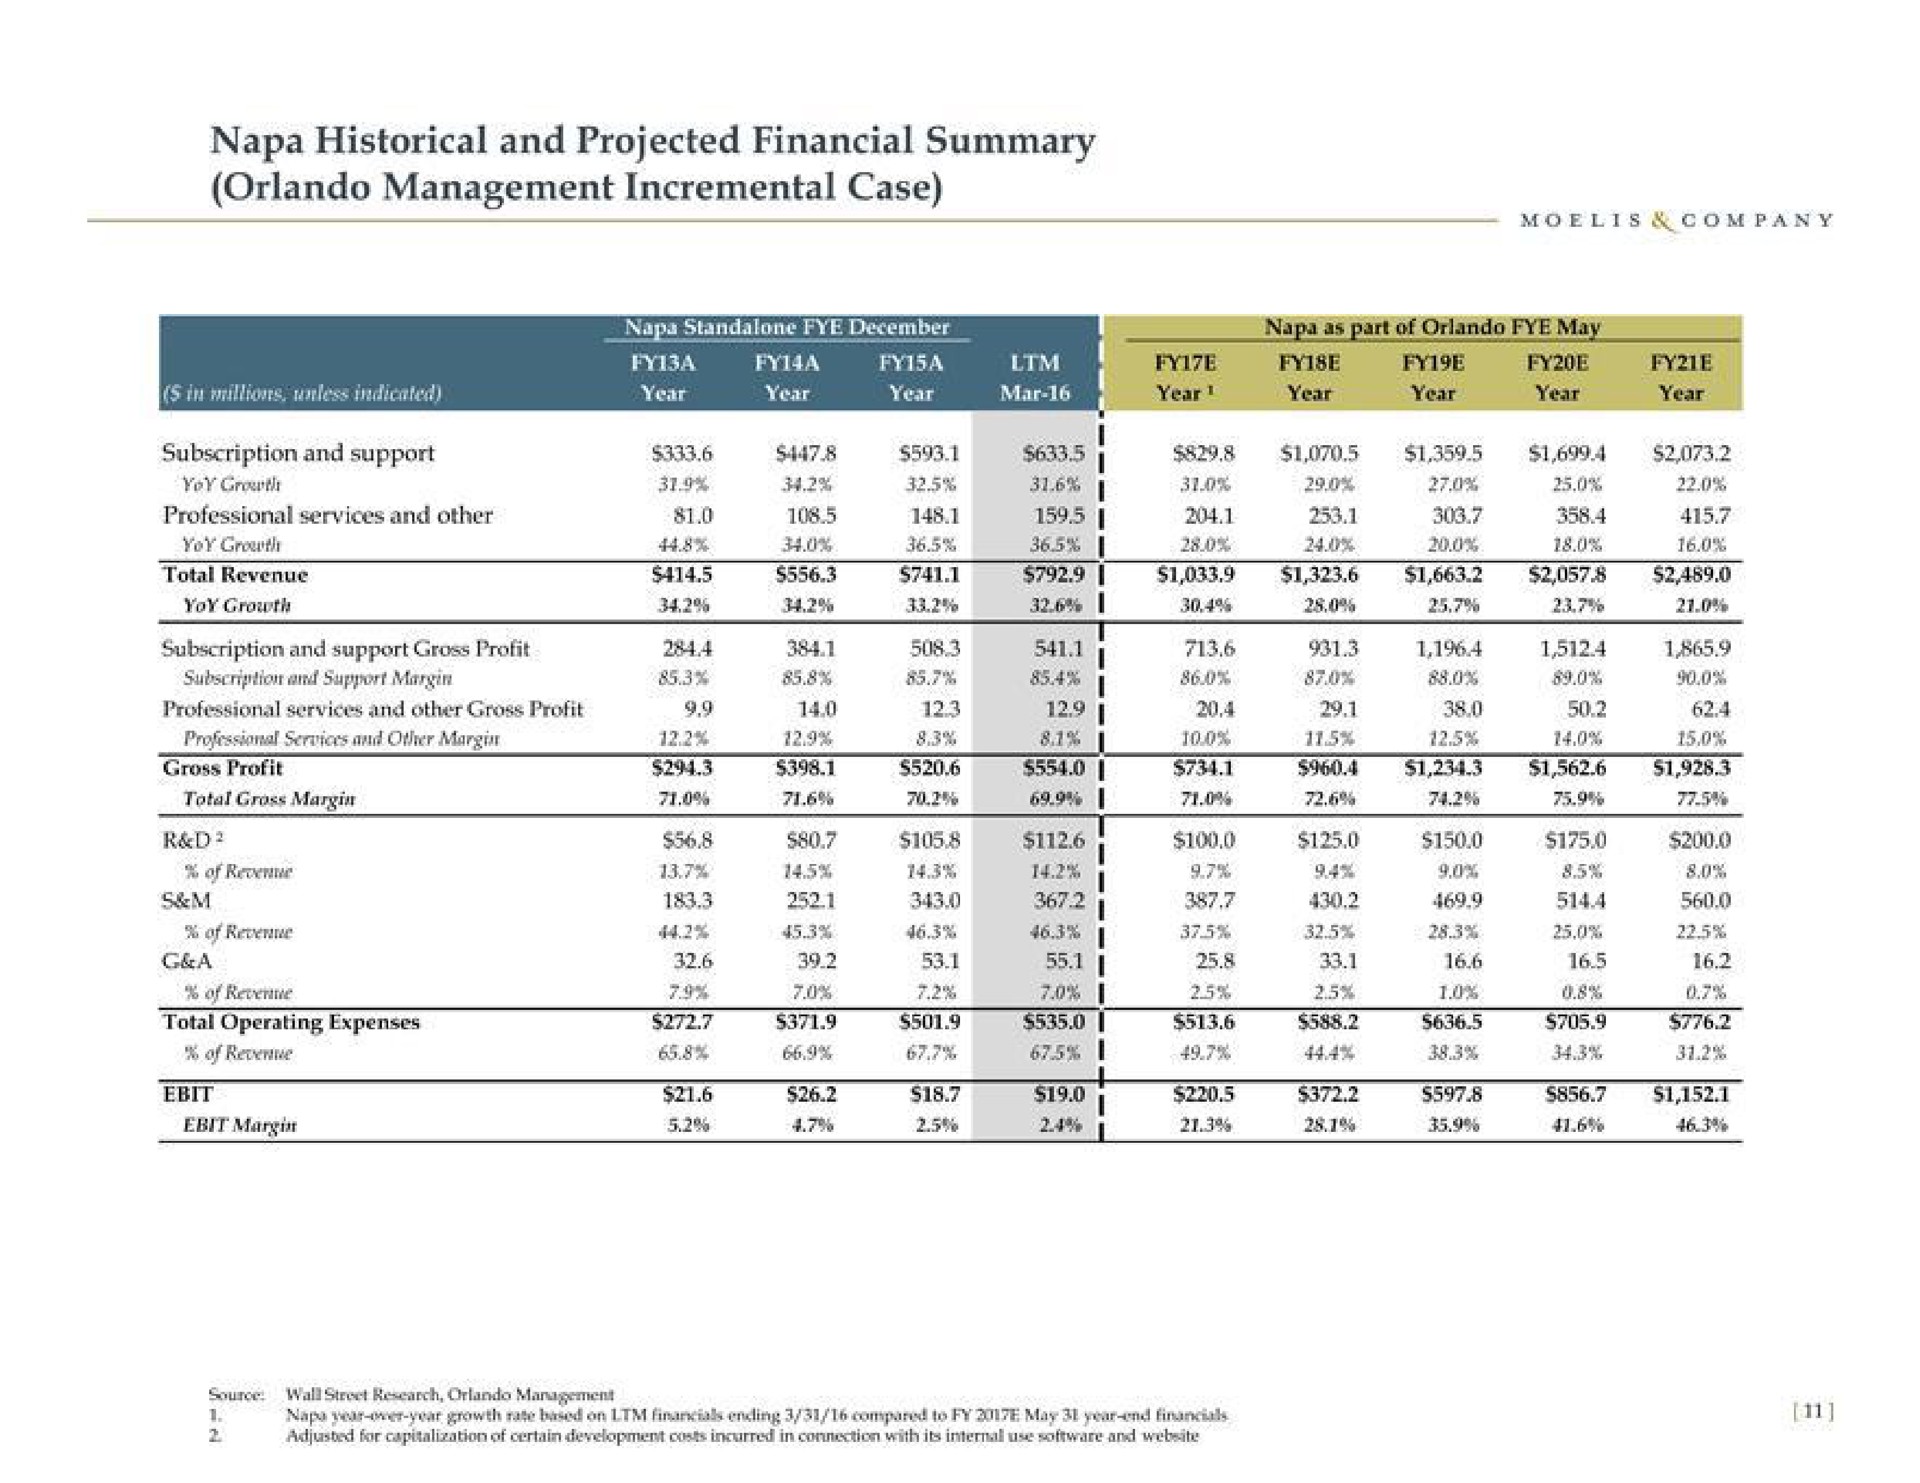 napa historical and projected financial summary management incremental case | Moelis & Company